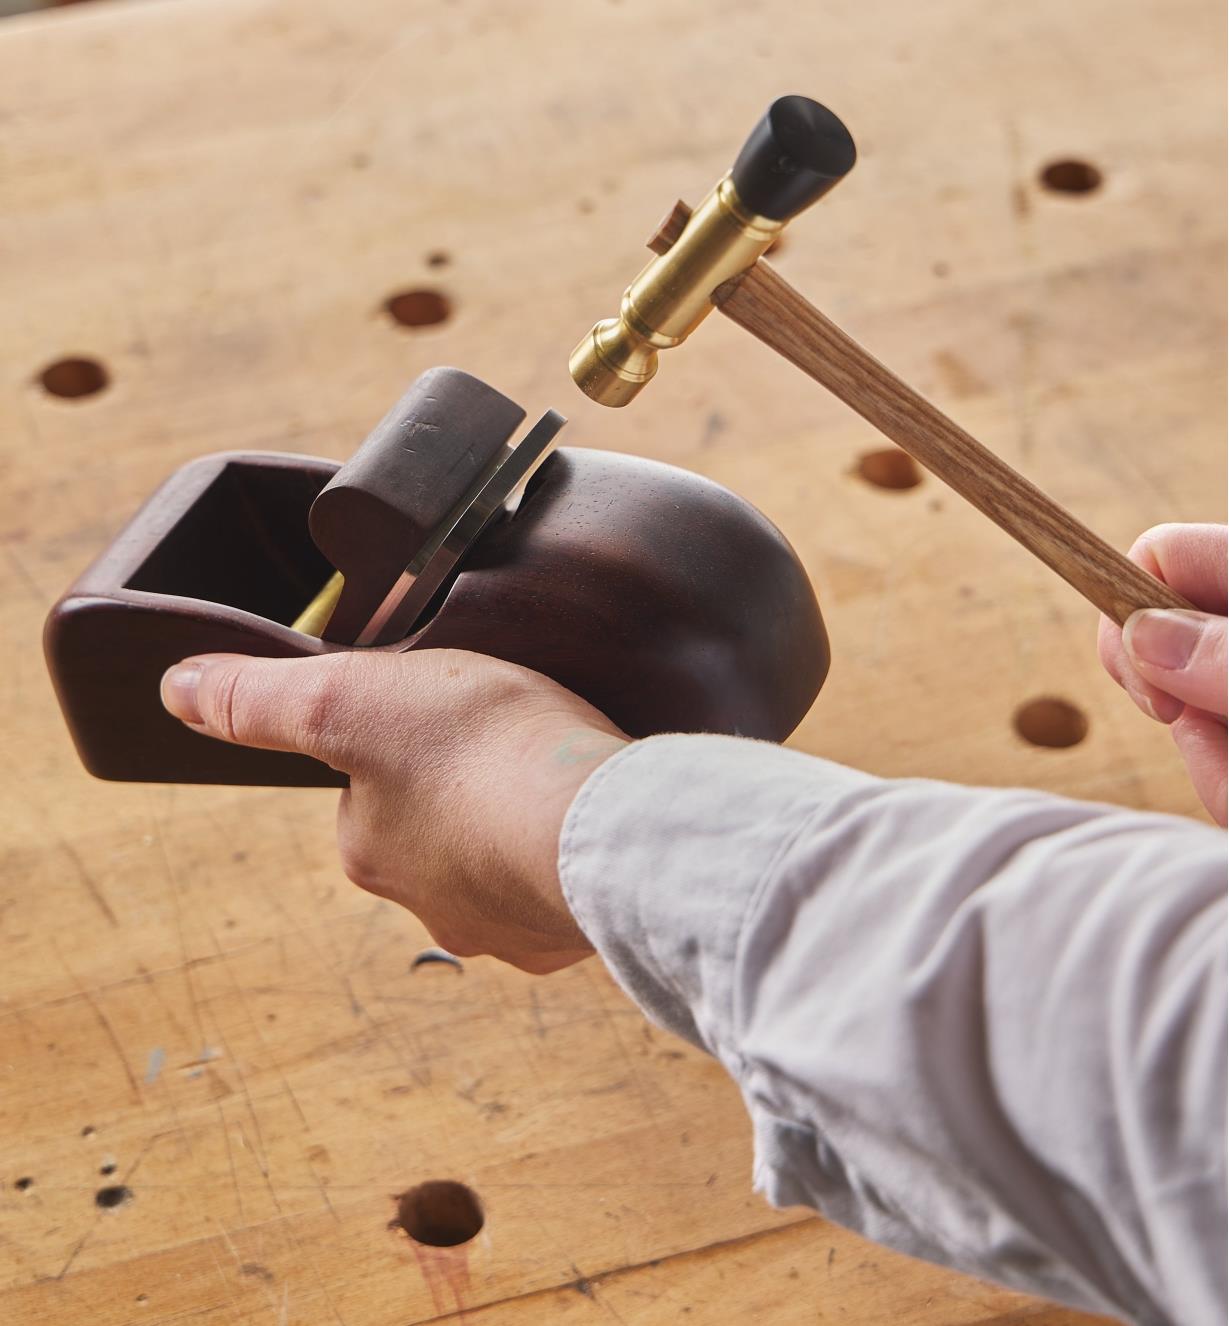 Adjusting the blade in a wooden plane using the Wile plane hammer